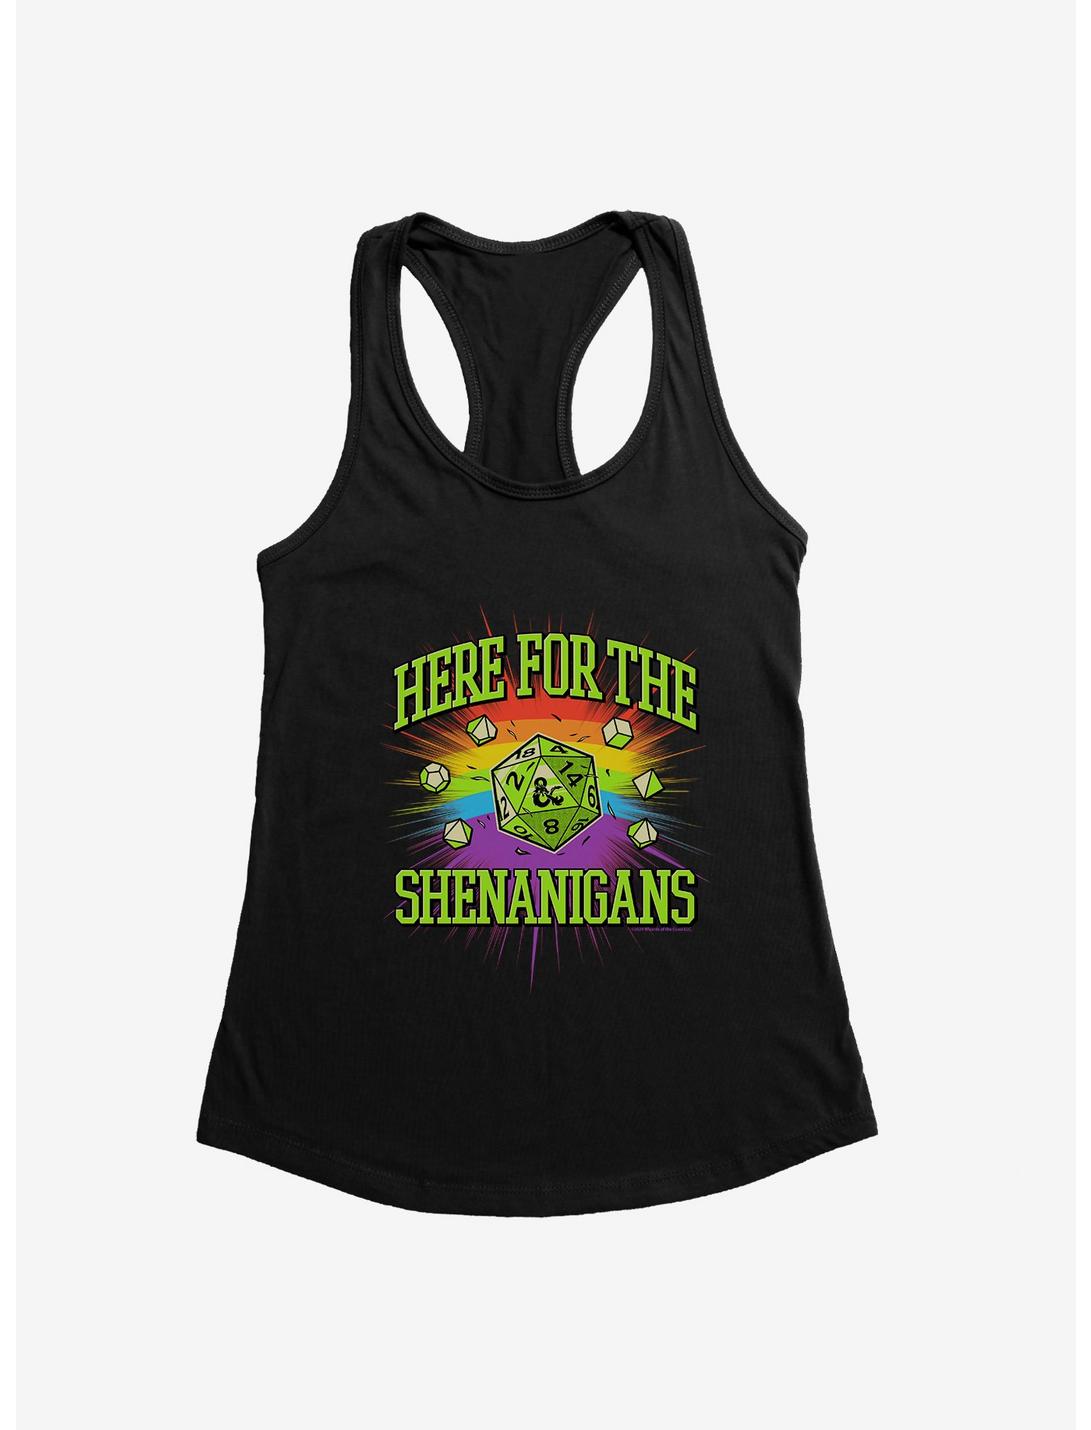 Dungeons & Dragons Here For The Shenanigans Girls Tank, BLACK, hi-res